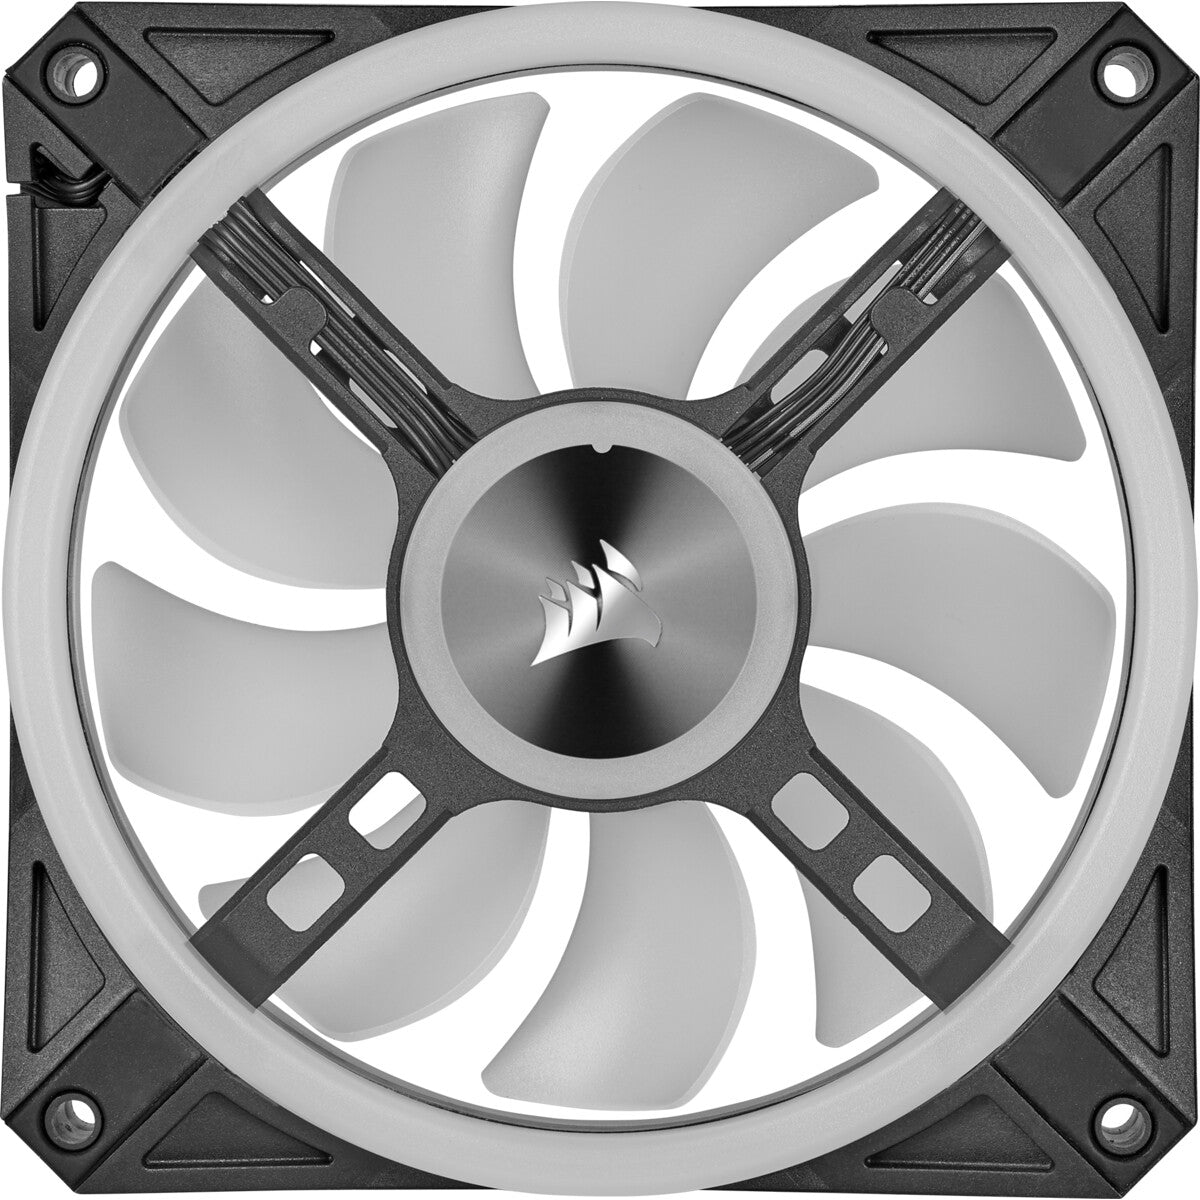 Corsair iCUE QL120 RGB - Computer Case Fan in Black / White - 120mm (Pack of 3)